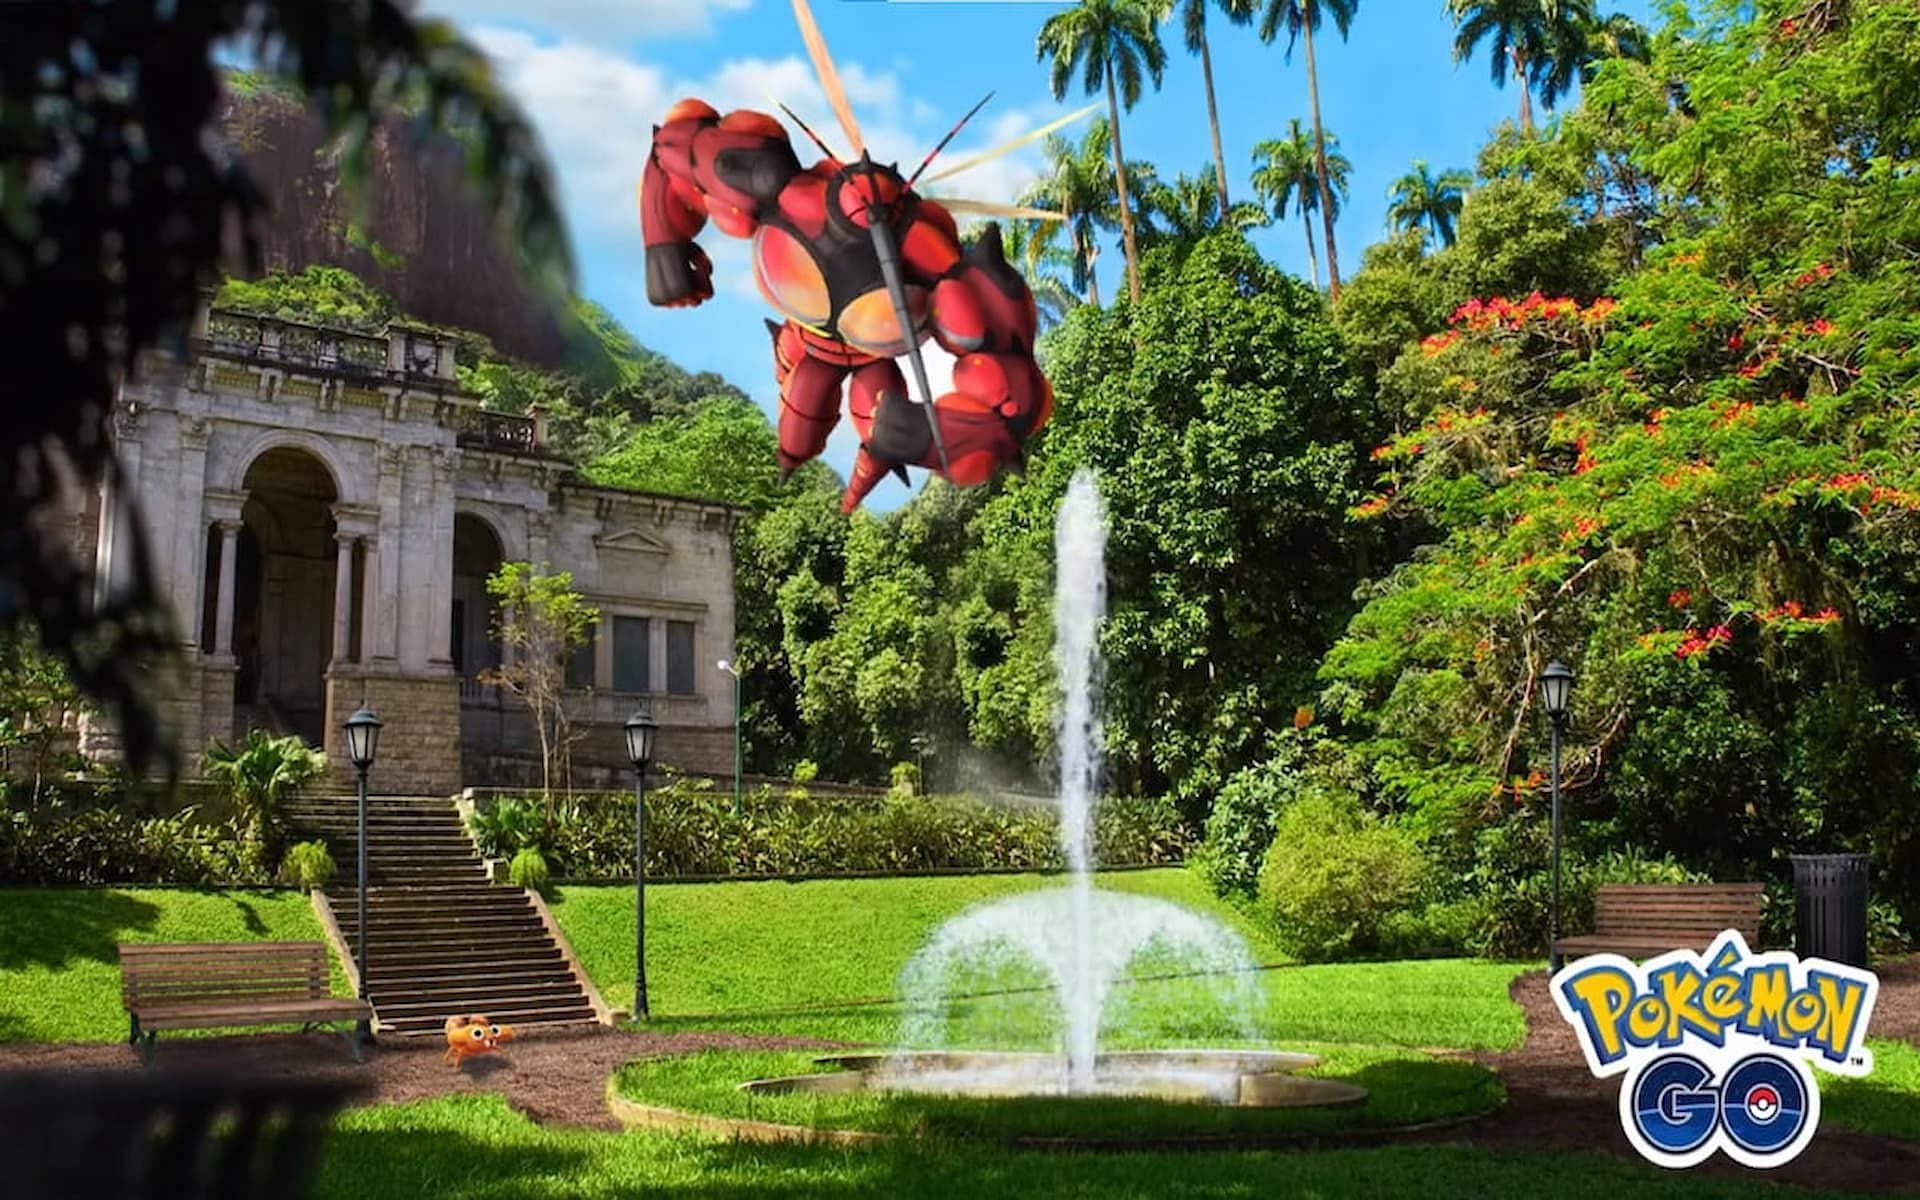 Buzzwole and other Ultra Beasts are taking over Pokemon GO (Image via Niantic)